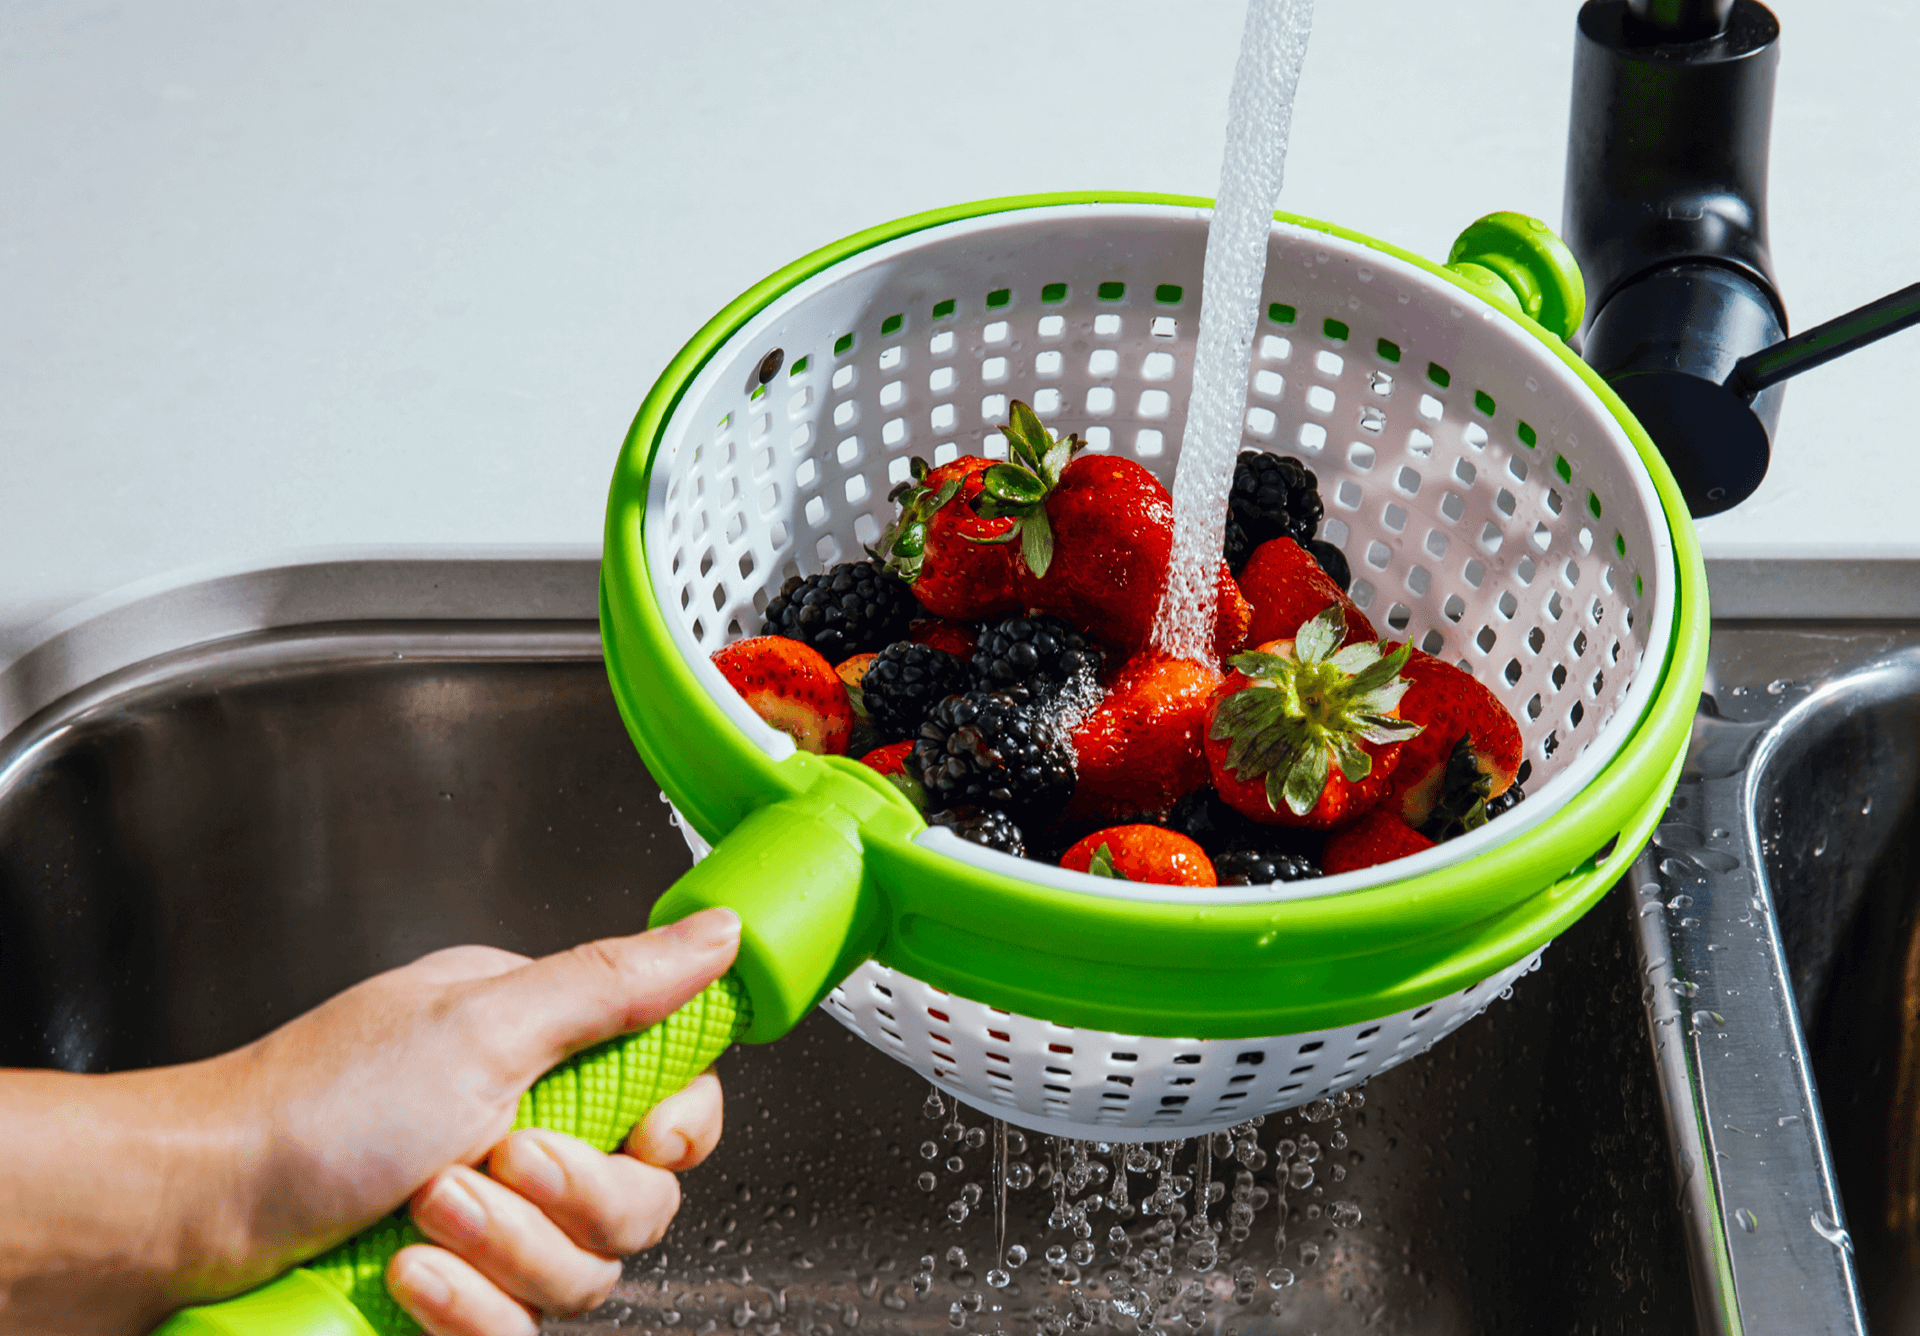 Dreamfarm Spina spinning colander transforms into in-sink salad spinner washing berries strawberries and blackberries